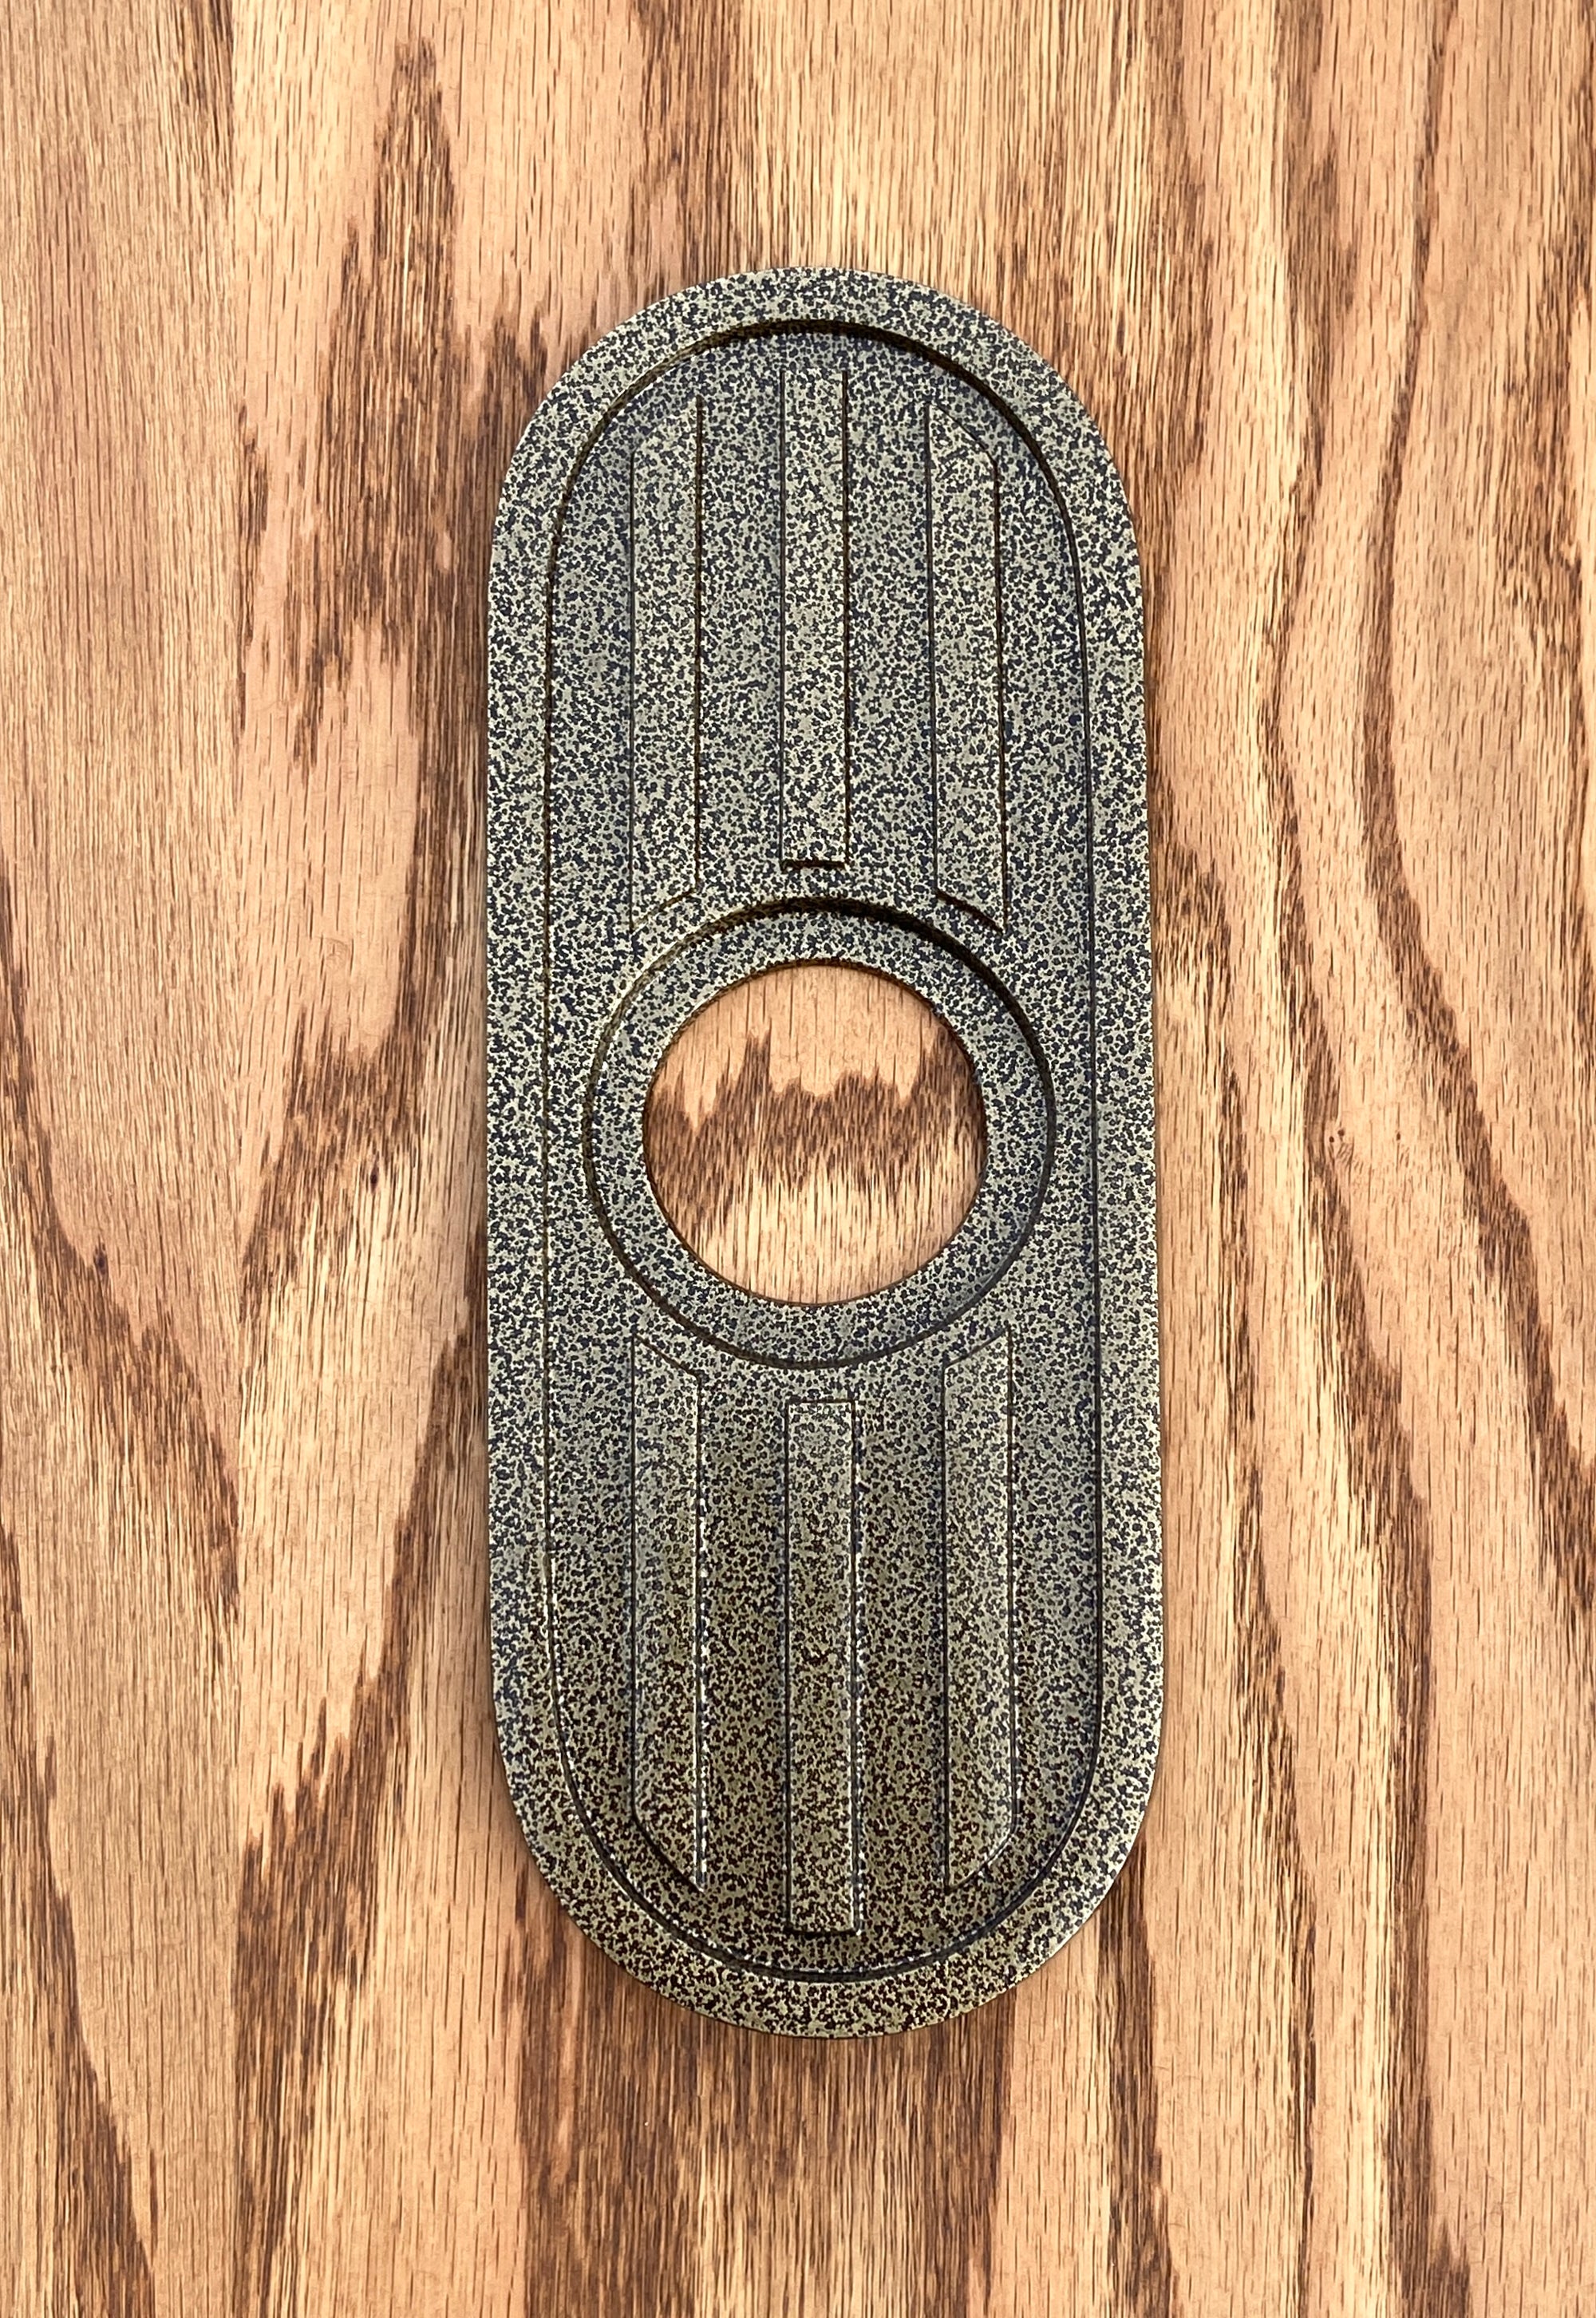 Gold vein powder coated escutcheon. The gold vein powder coat is a speckled or crackled texture mixing both gold and black. It is still smooth and slightly glossy to reflect the light.